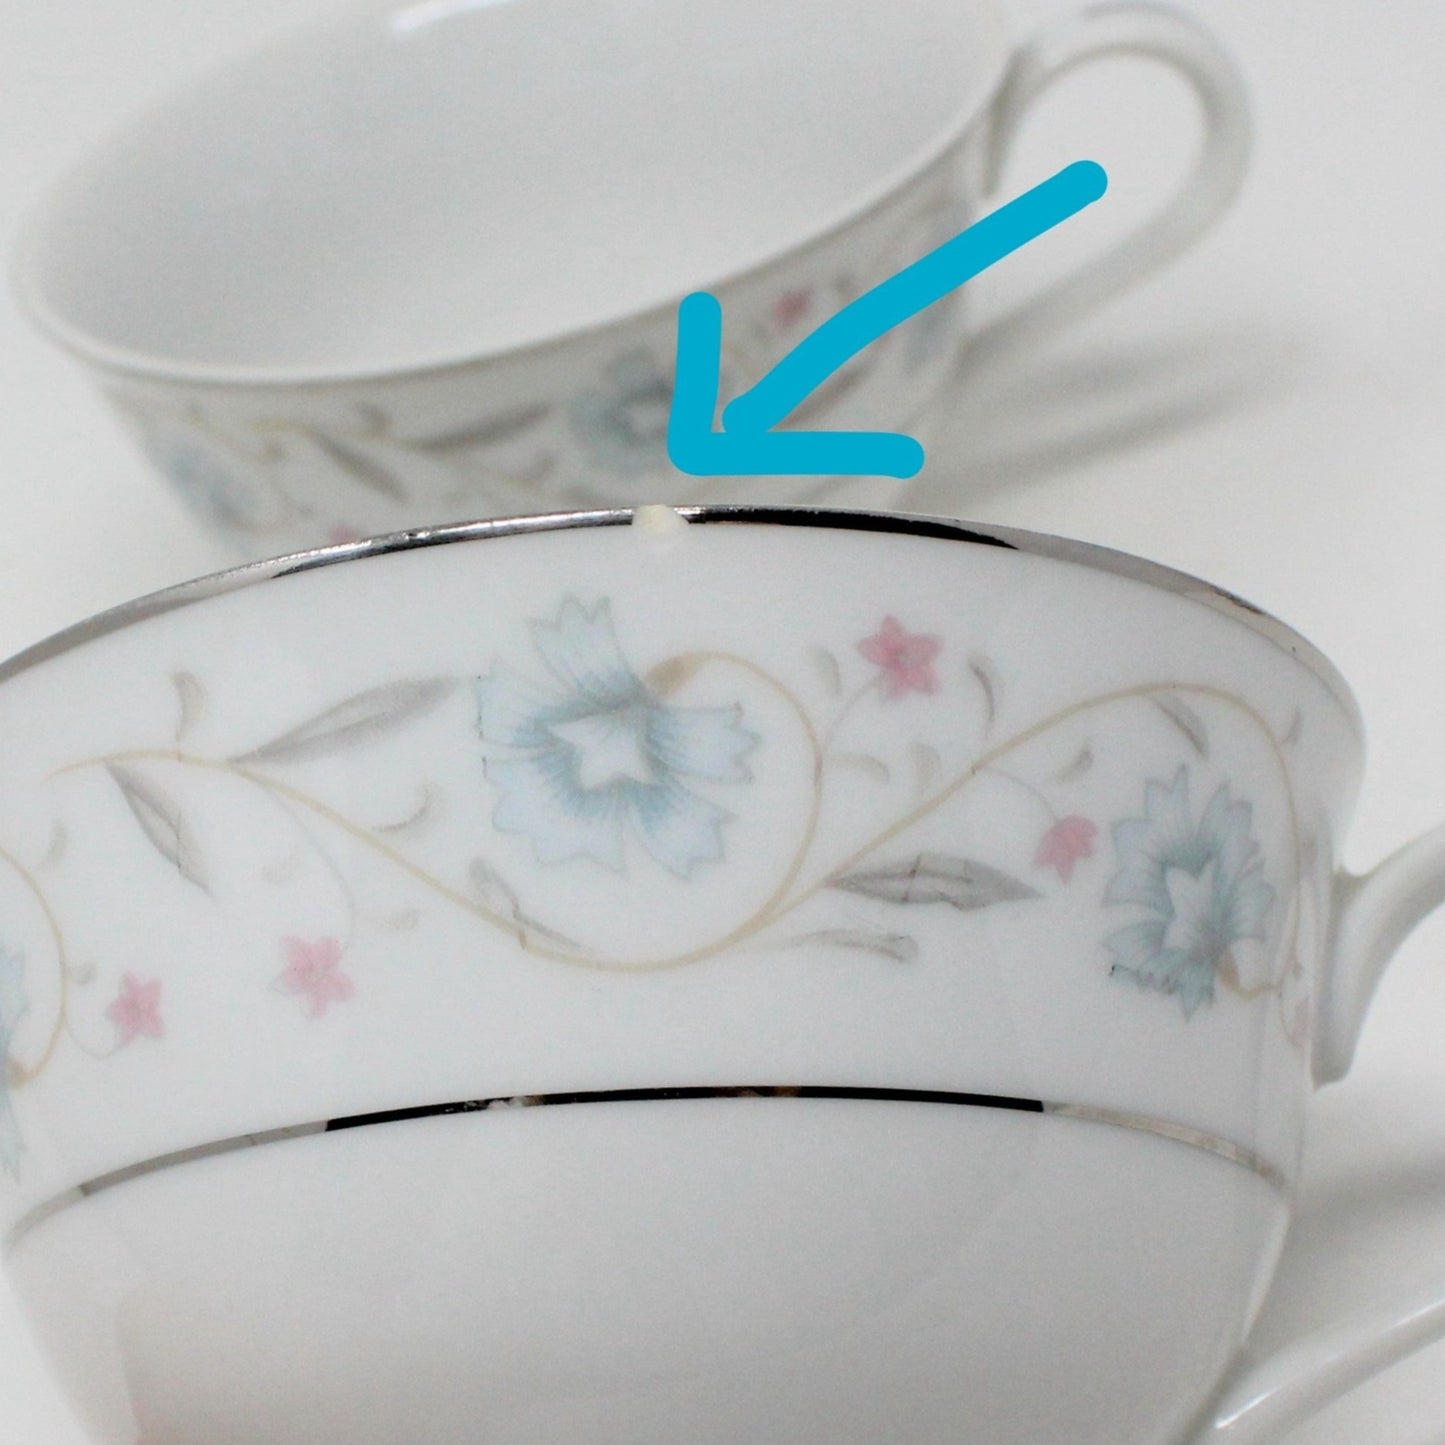 Teacup, Fine China of Japan, English Garden, Vintage - CUP ONLY